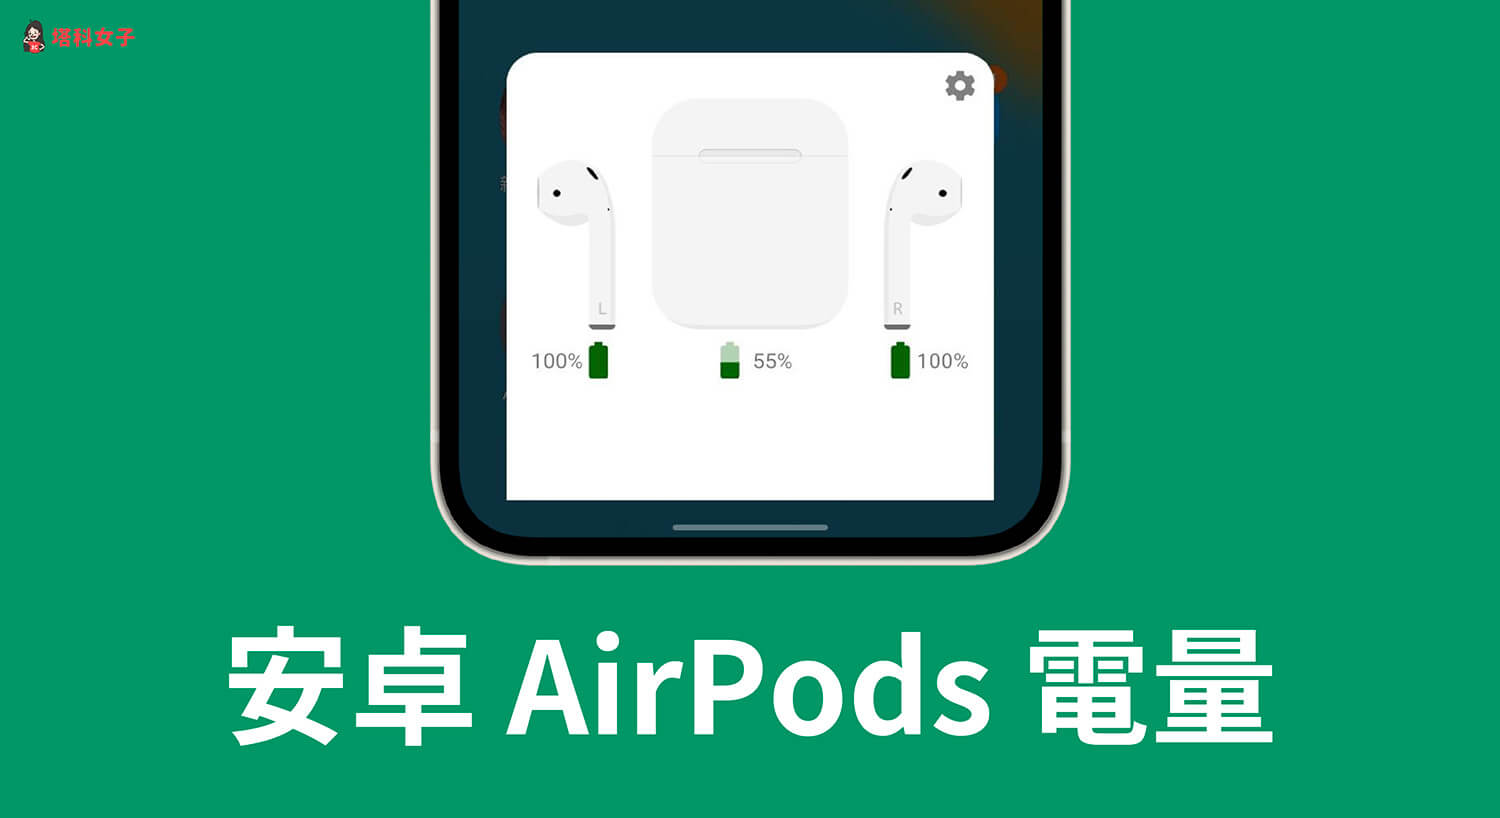 Android AirPods 電量怎麼看？免費 AirBattery App 一鍵顯示